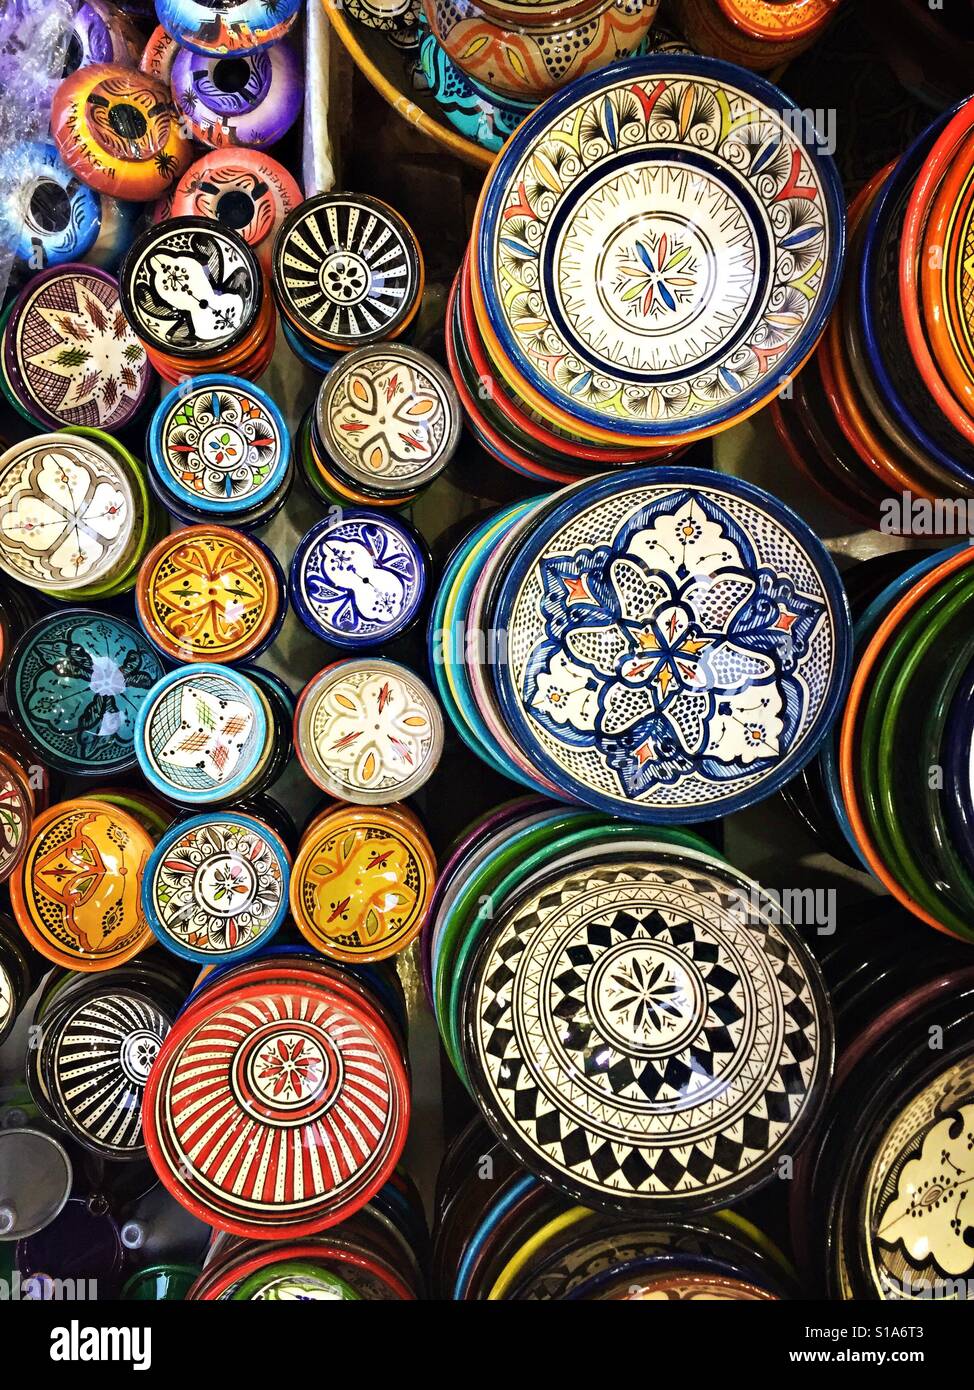 Hand-painted bowls for sale are seen on a market stall in Marakech, Morocco. Stock Photo